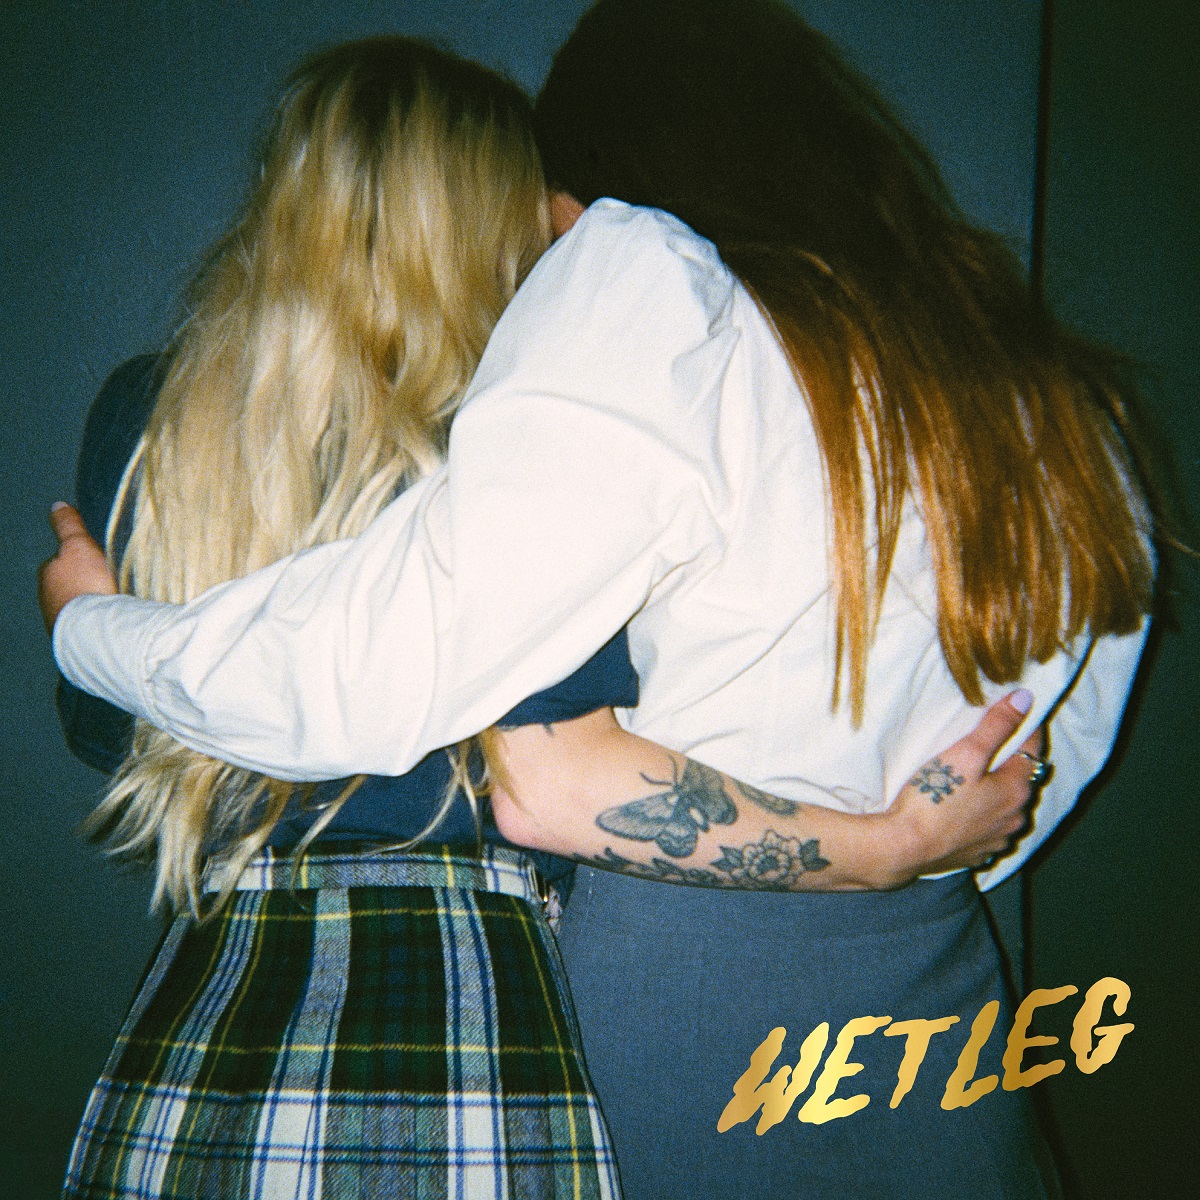 Cover image of Wet Leg debut album; two girls hug with their heads together.